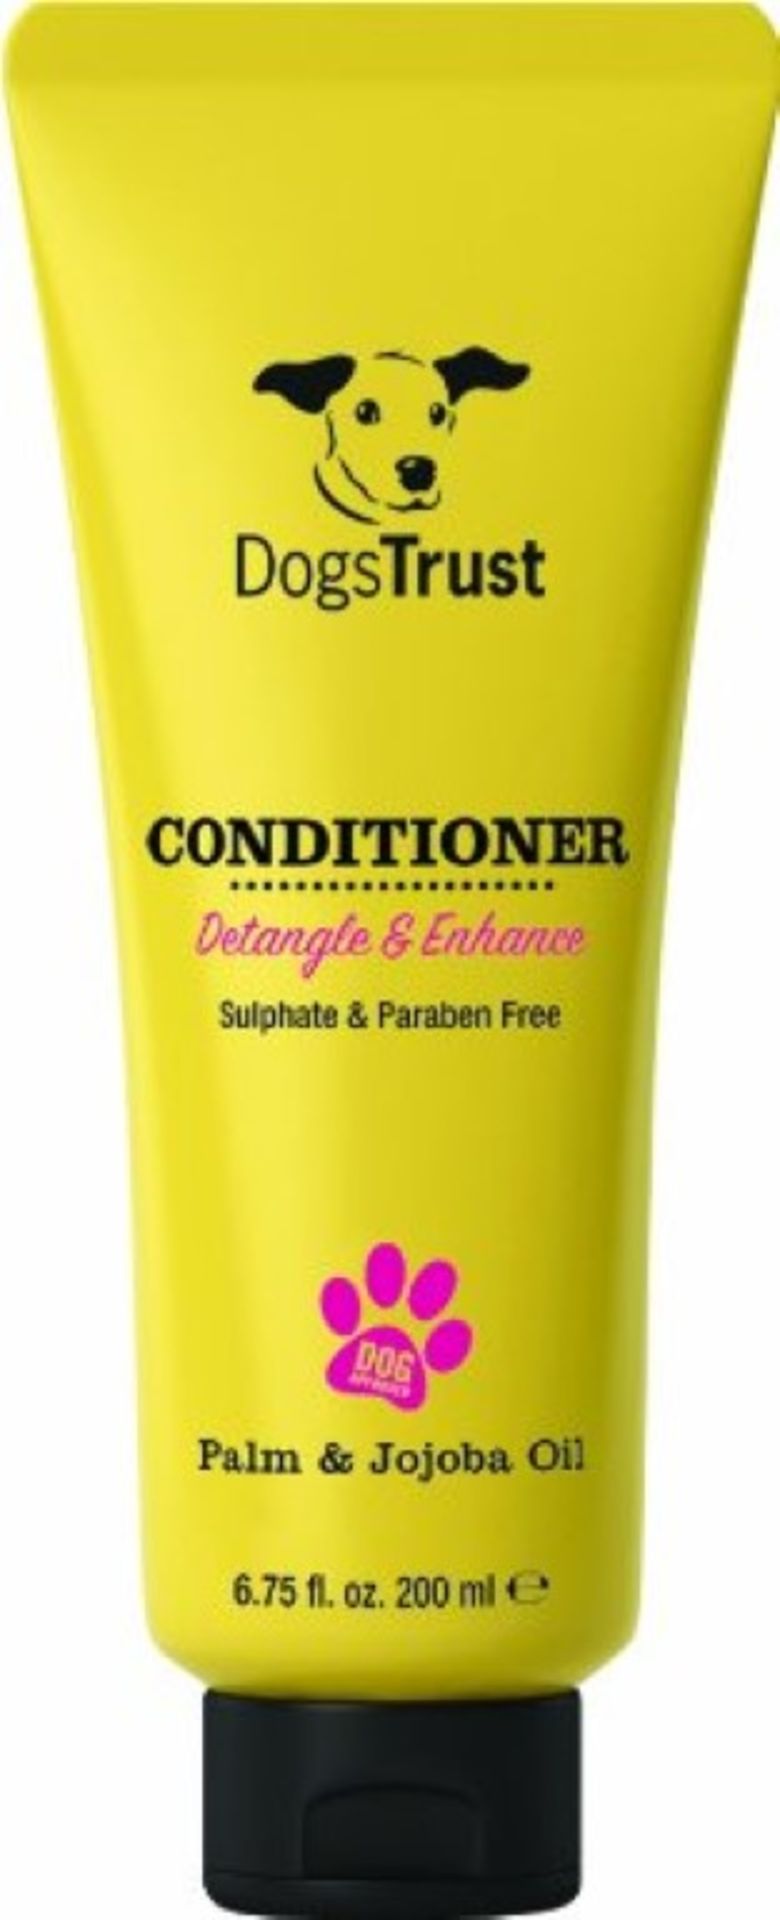 60 x Various Dogs Trust Shampoos and Conditioners - Brand New Stock - CL028 - Includes No Tears, - Image 8 of 16